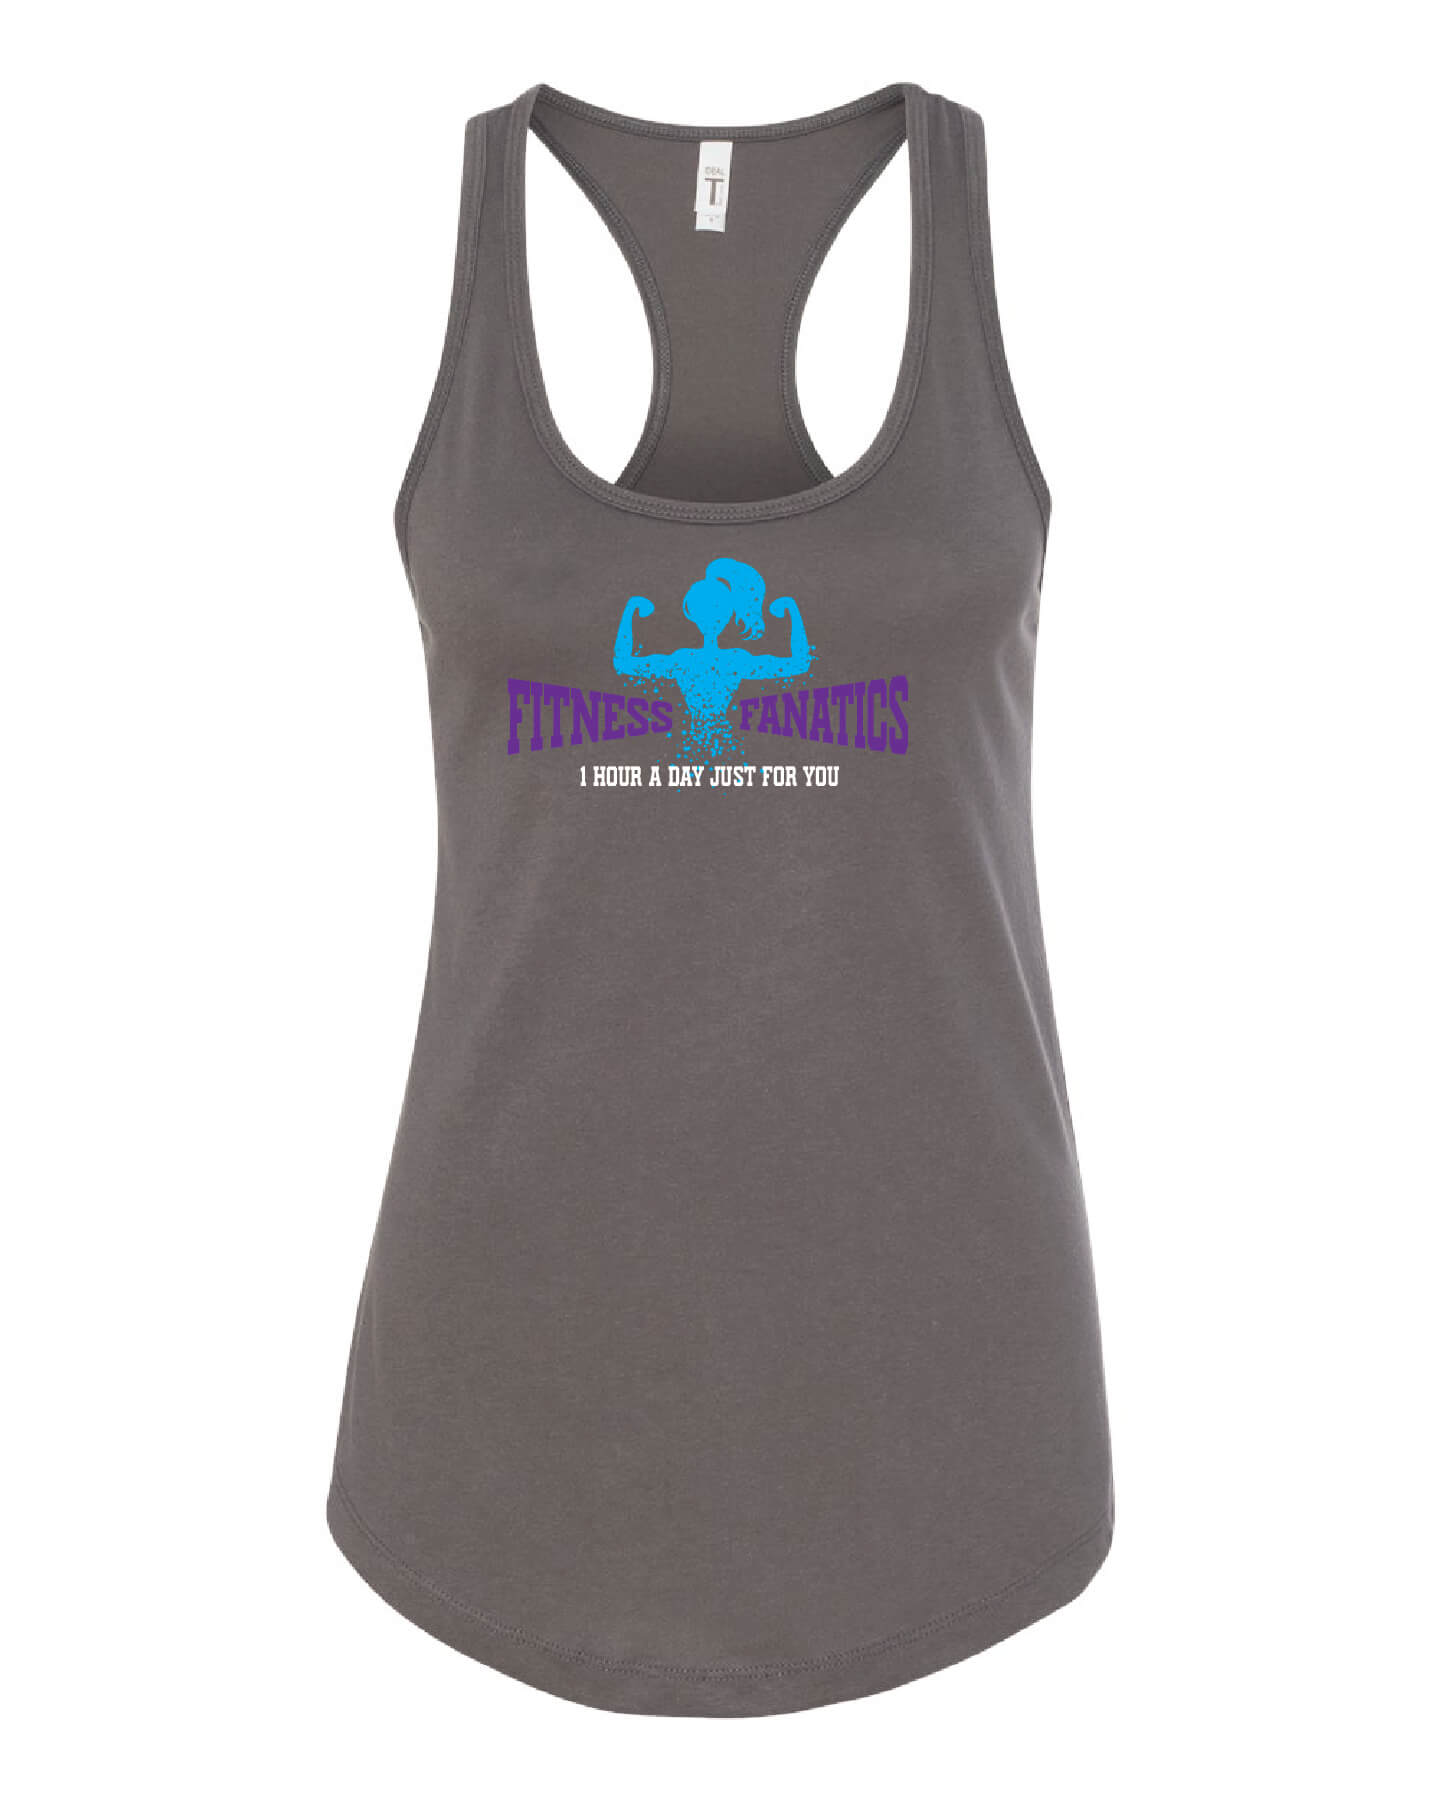 Womens Racerback Tank gray with blue